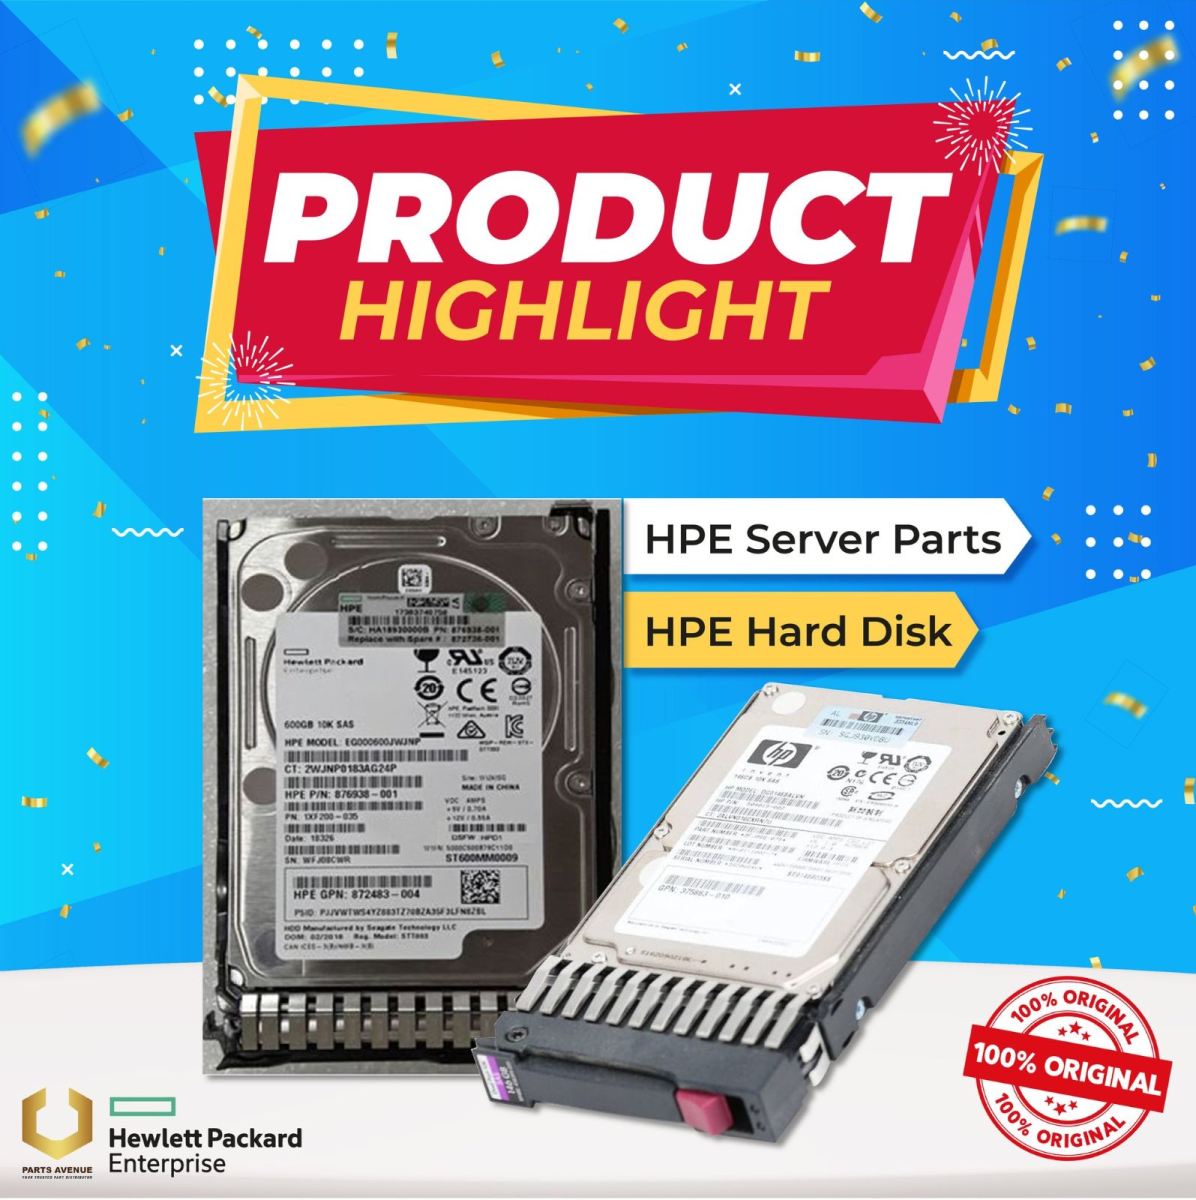 January Product Highlight - Celebrating the Tech Powerhouse With HPE Server Parts & HPE Hard Disk